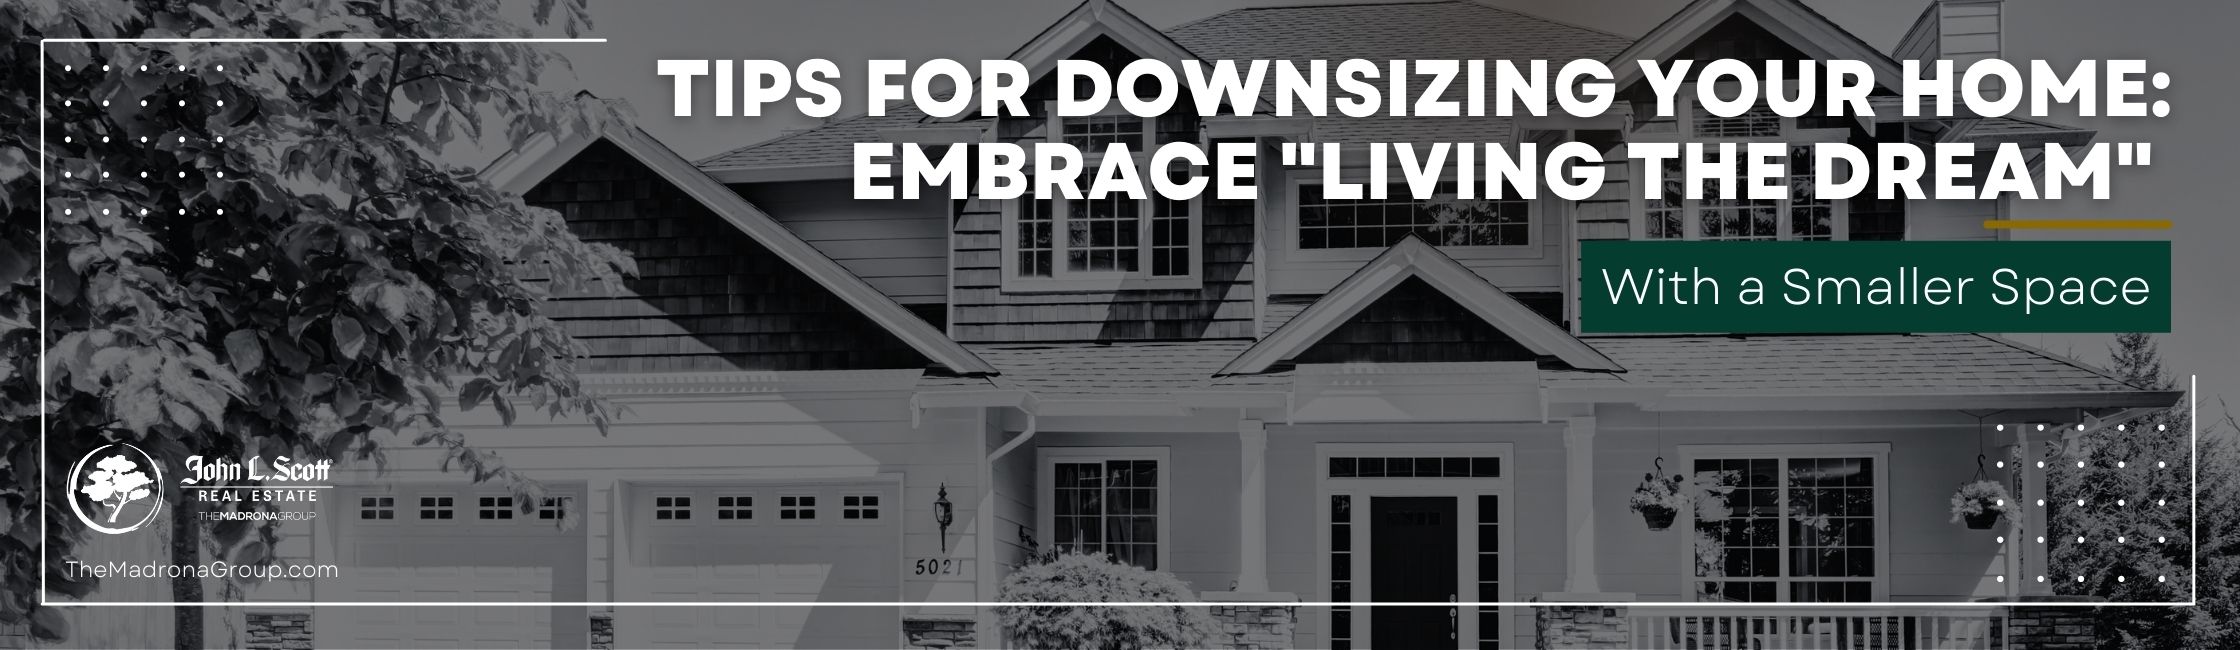 Tips for Downsizing Your Home: Embrace "Living The Dream" with a Smaller Space